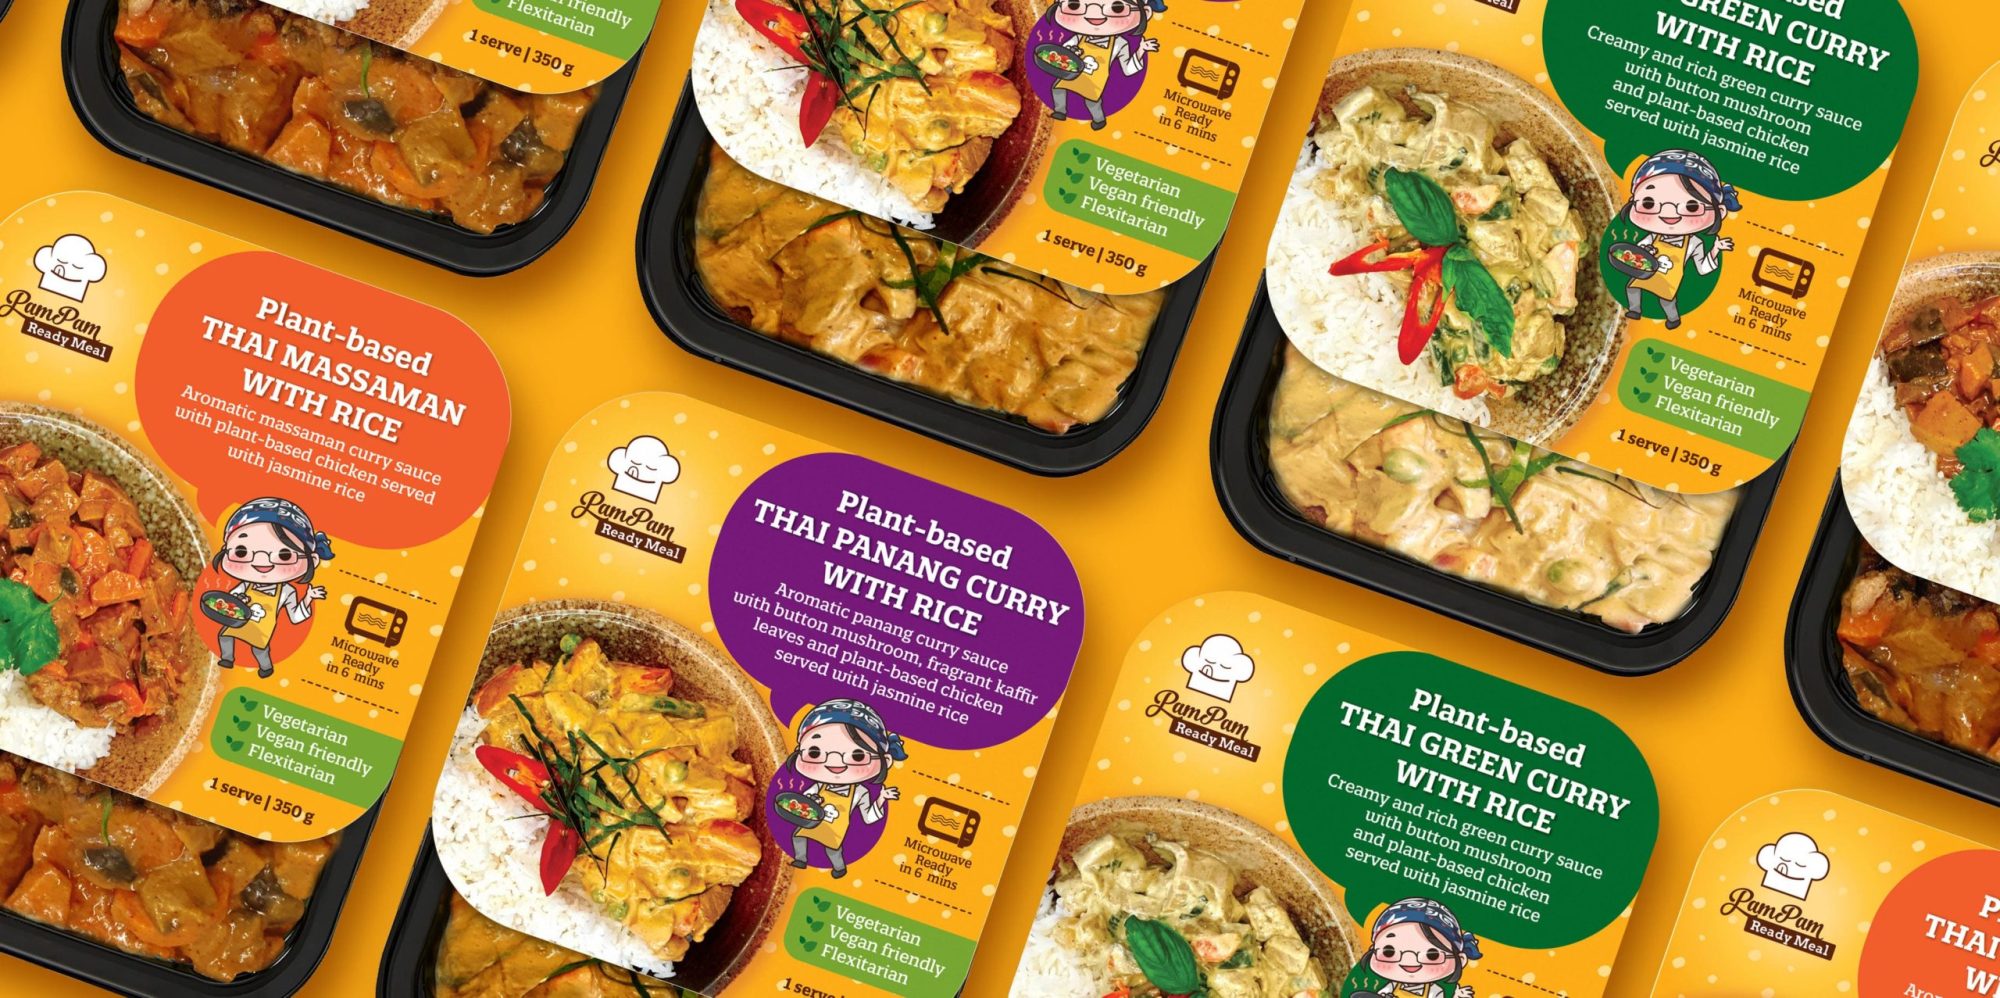 packaging-design-product-label-design-branding-logo-visual-identity-food-fmcg-product-line-ready-meal-packaging-design-frozen-product